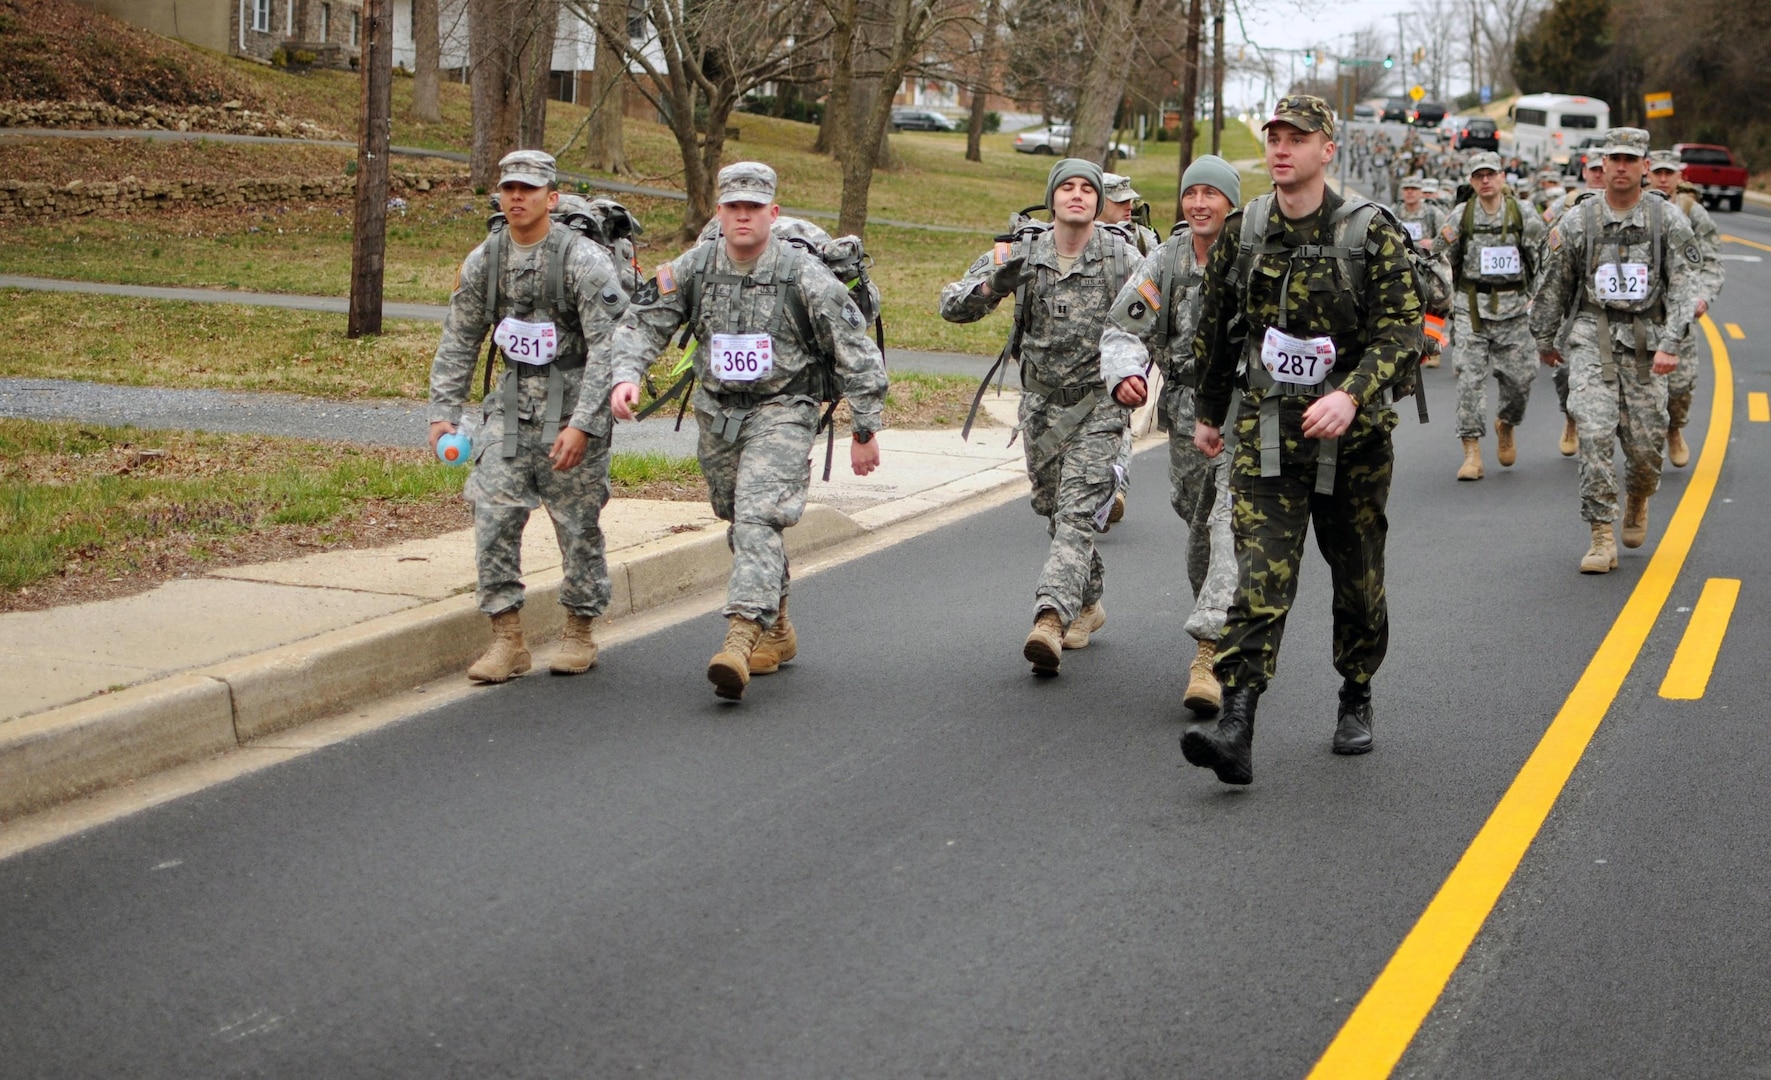 Service members march 18.6 miles to give back to community > National